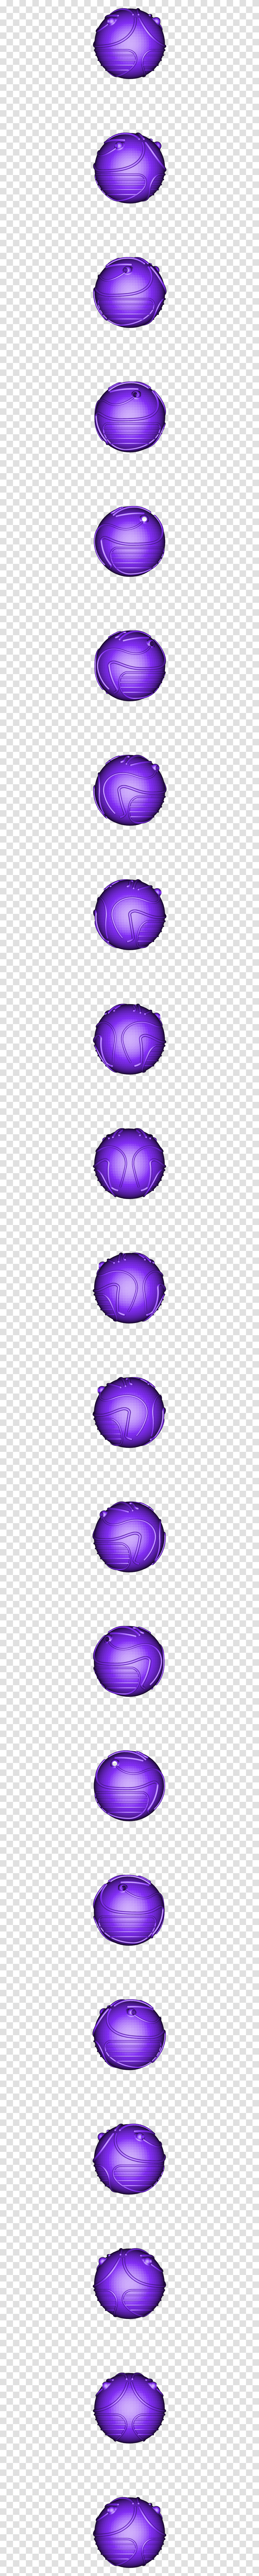 Water Volleyball, Sphere, Bowling, Purple, Light Transparent Png